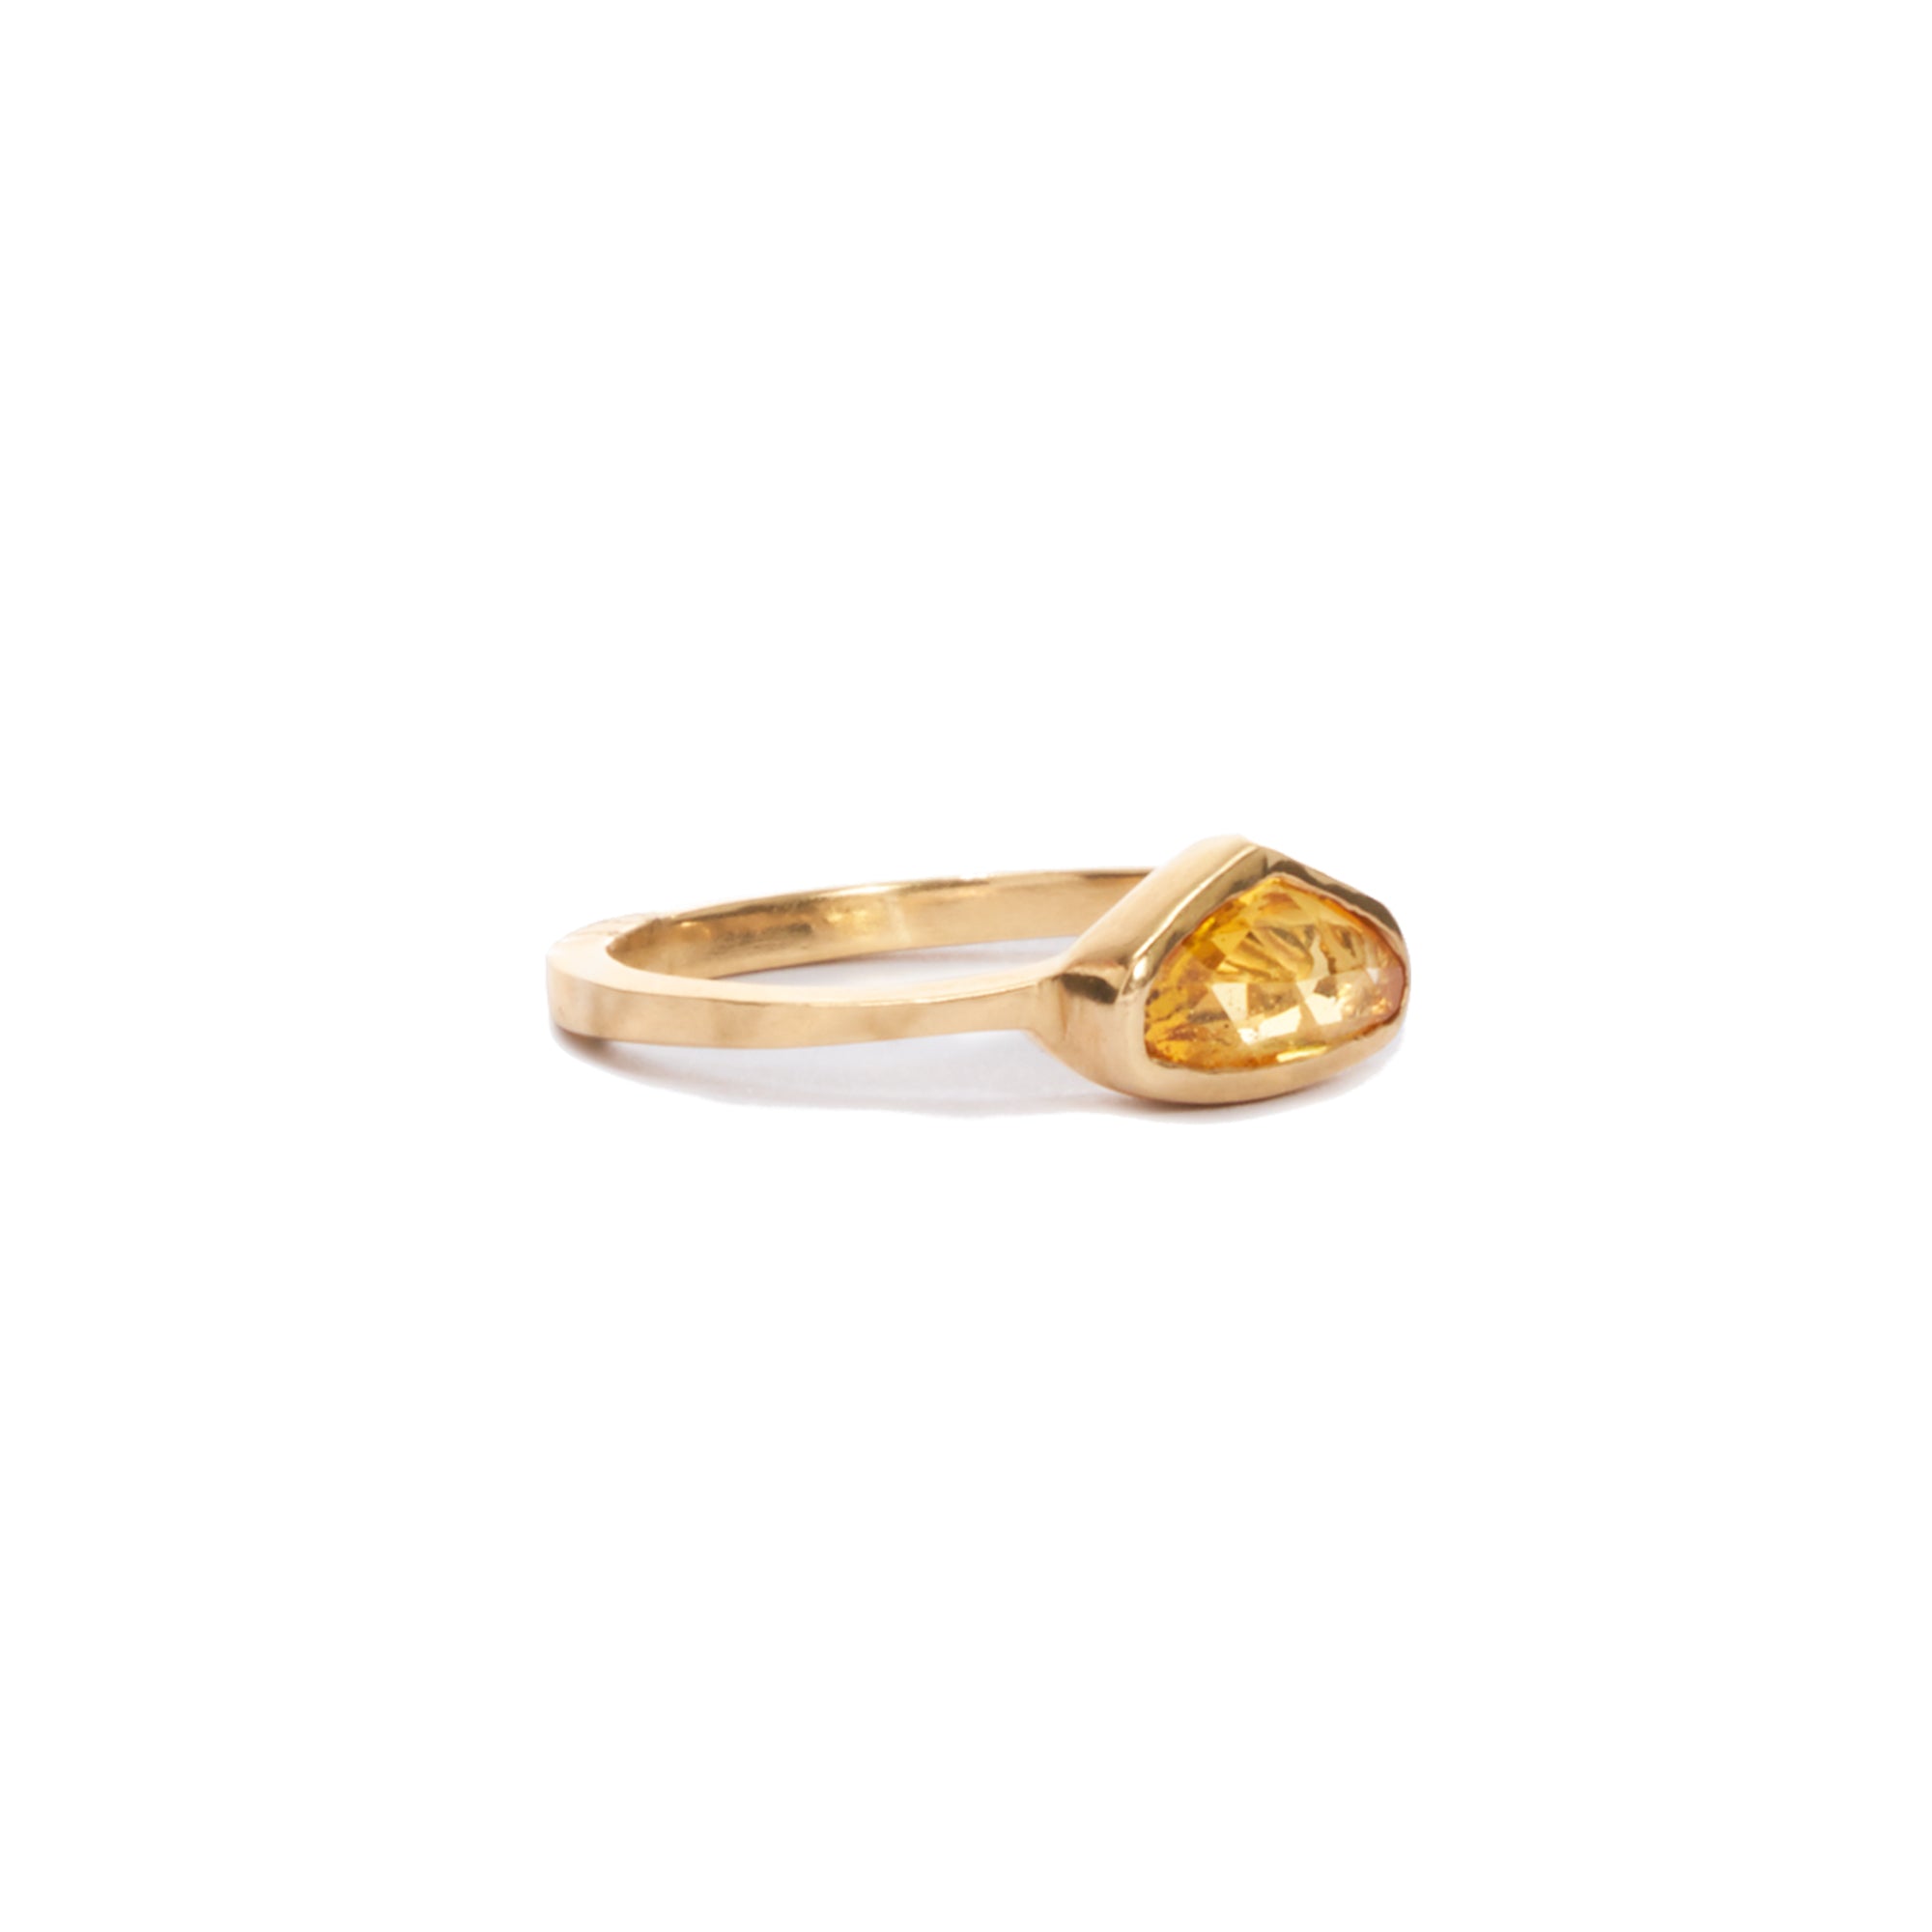 This ONE OF A KIND yellow sapphire ring is perfect as a right-hand ring or an engagement ring for an alternative bride.